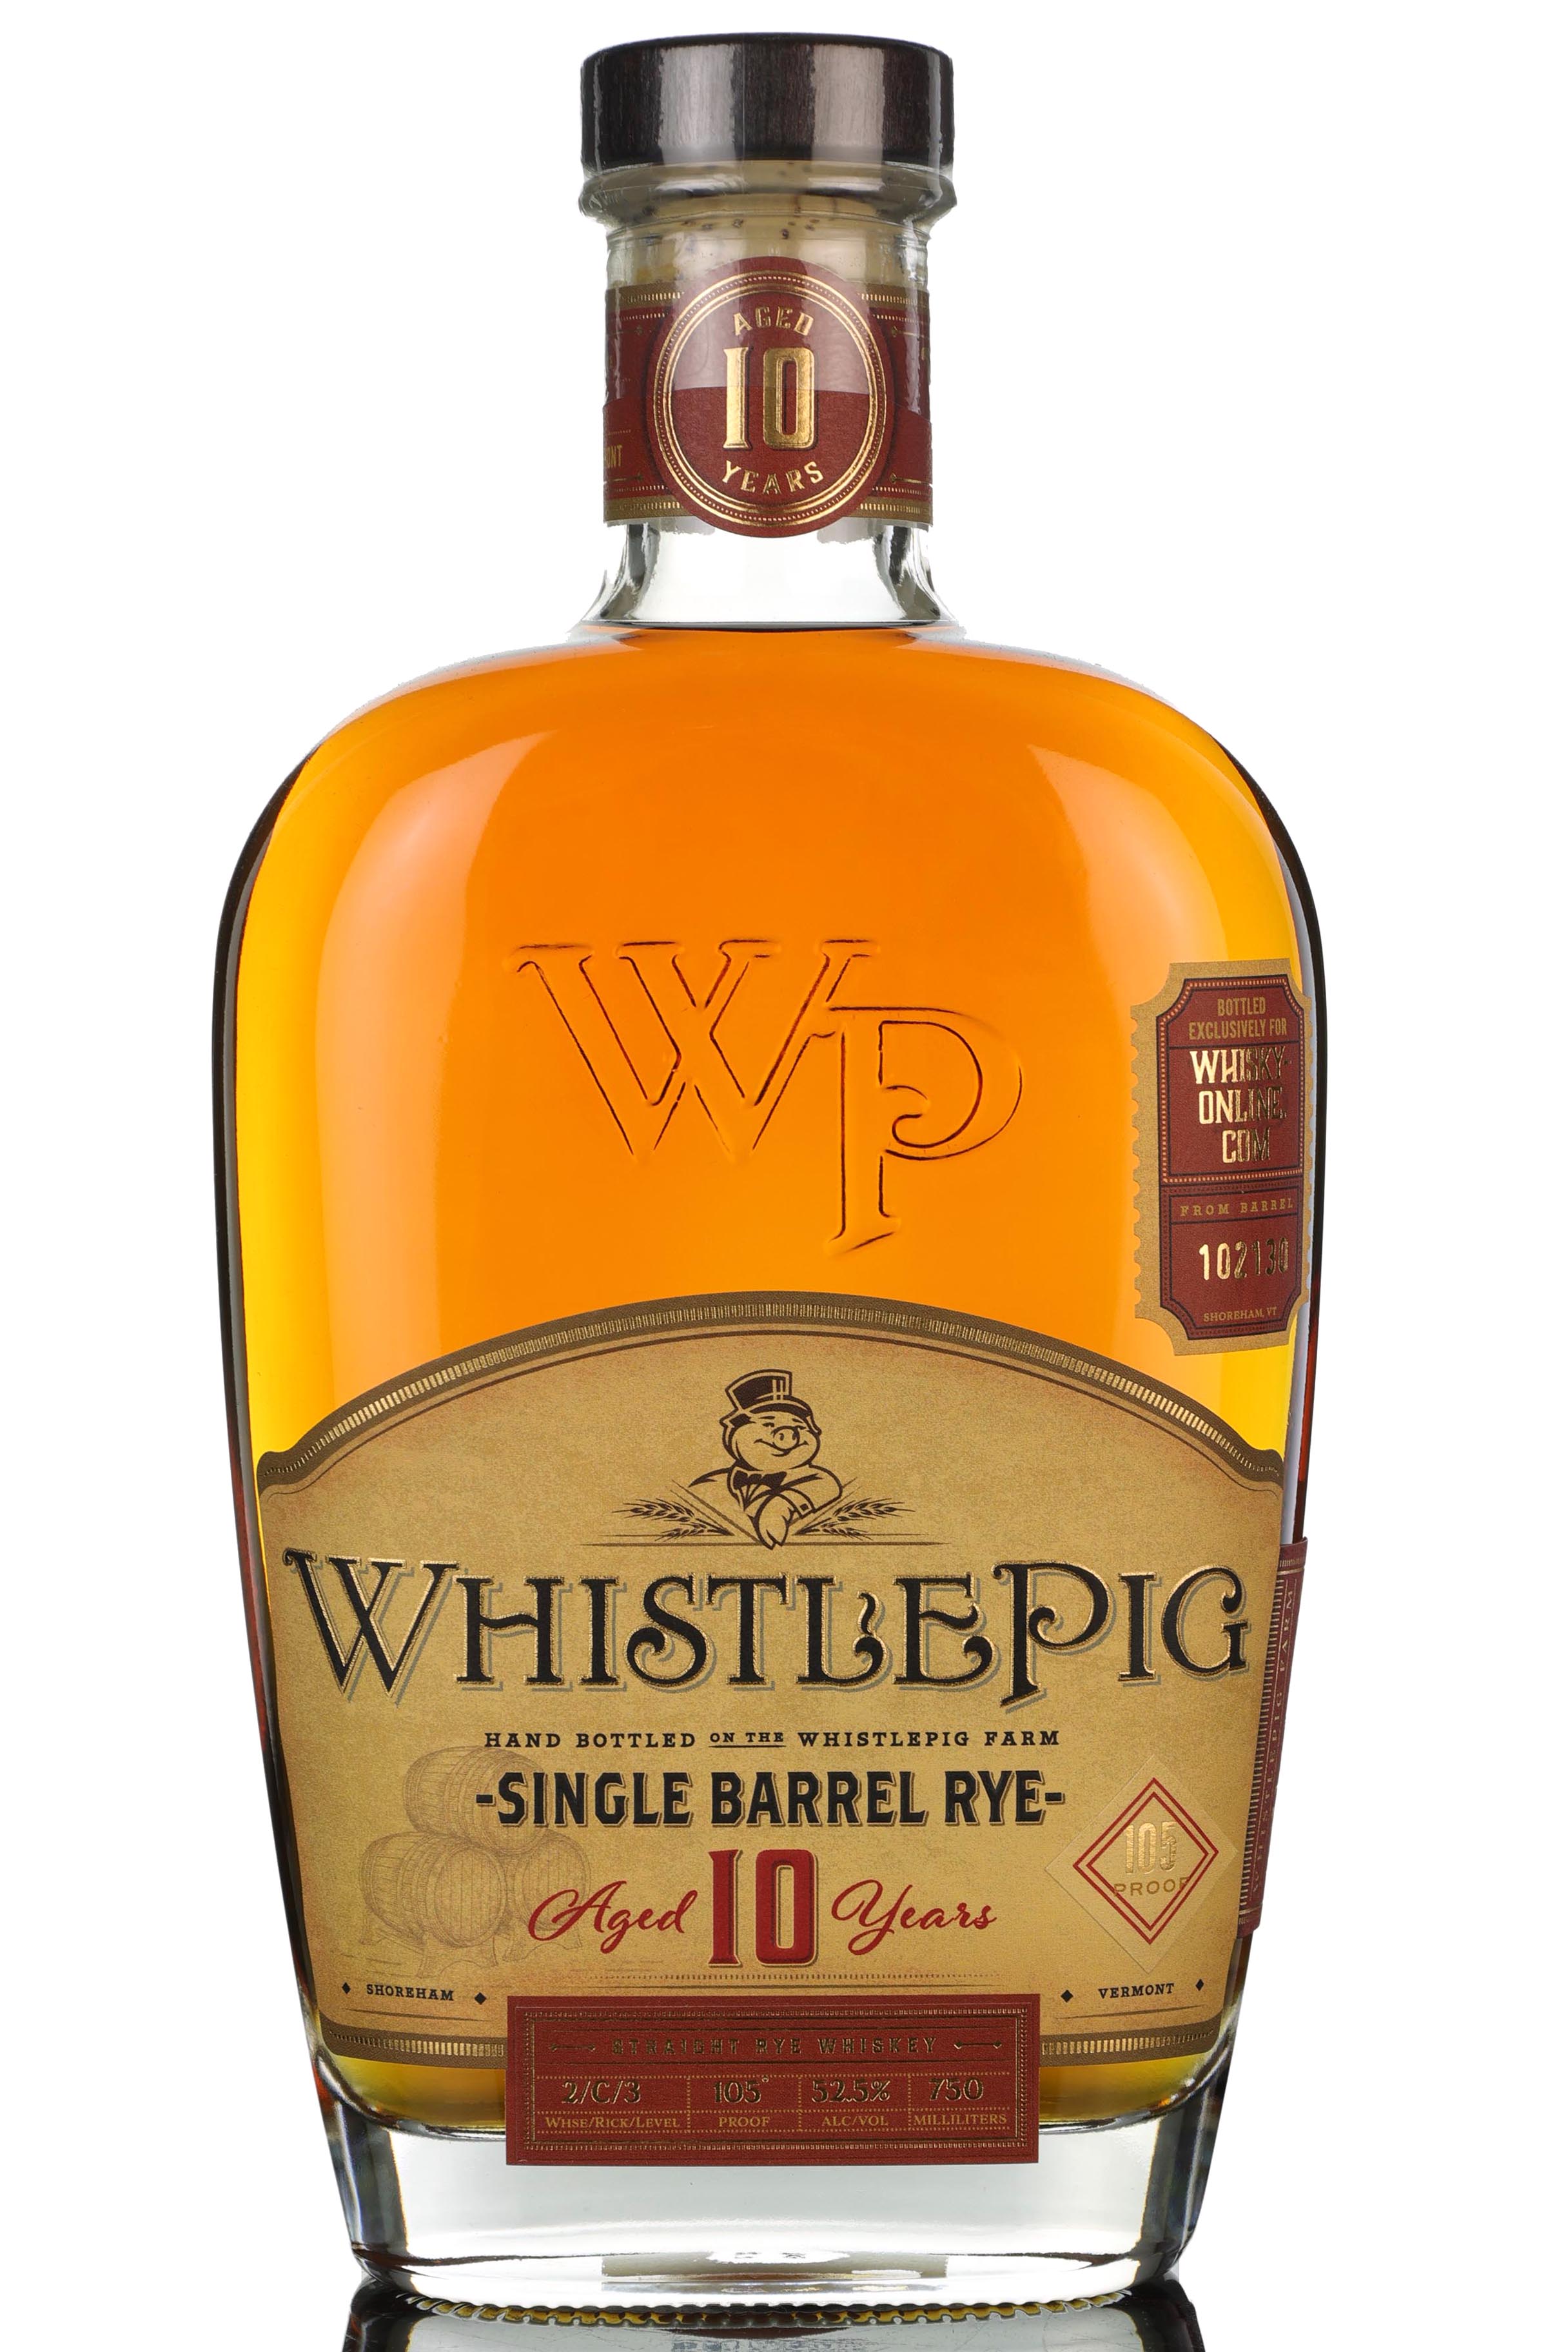 WhistlePig 10 Year Old - Single Barrel 102130 - 2020 Release - Whisky-Online Exclusive